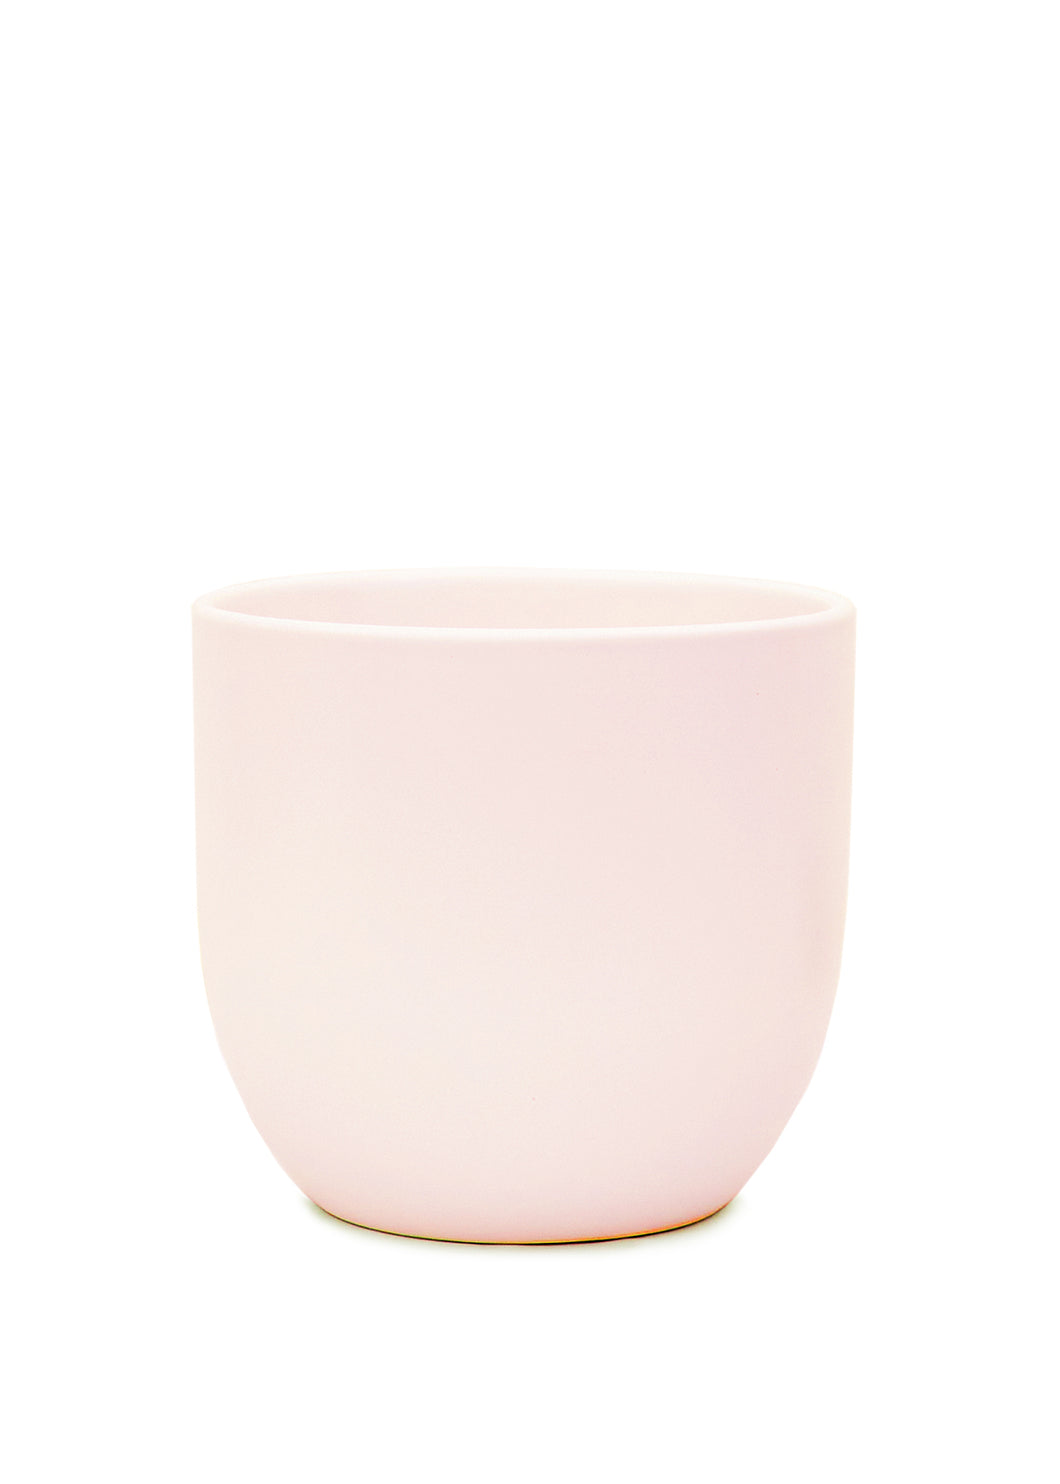 Rounded Ceramic Planter, Pink 7